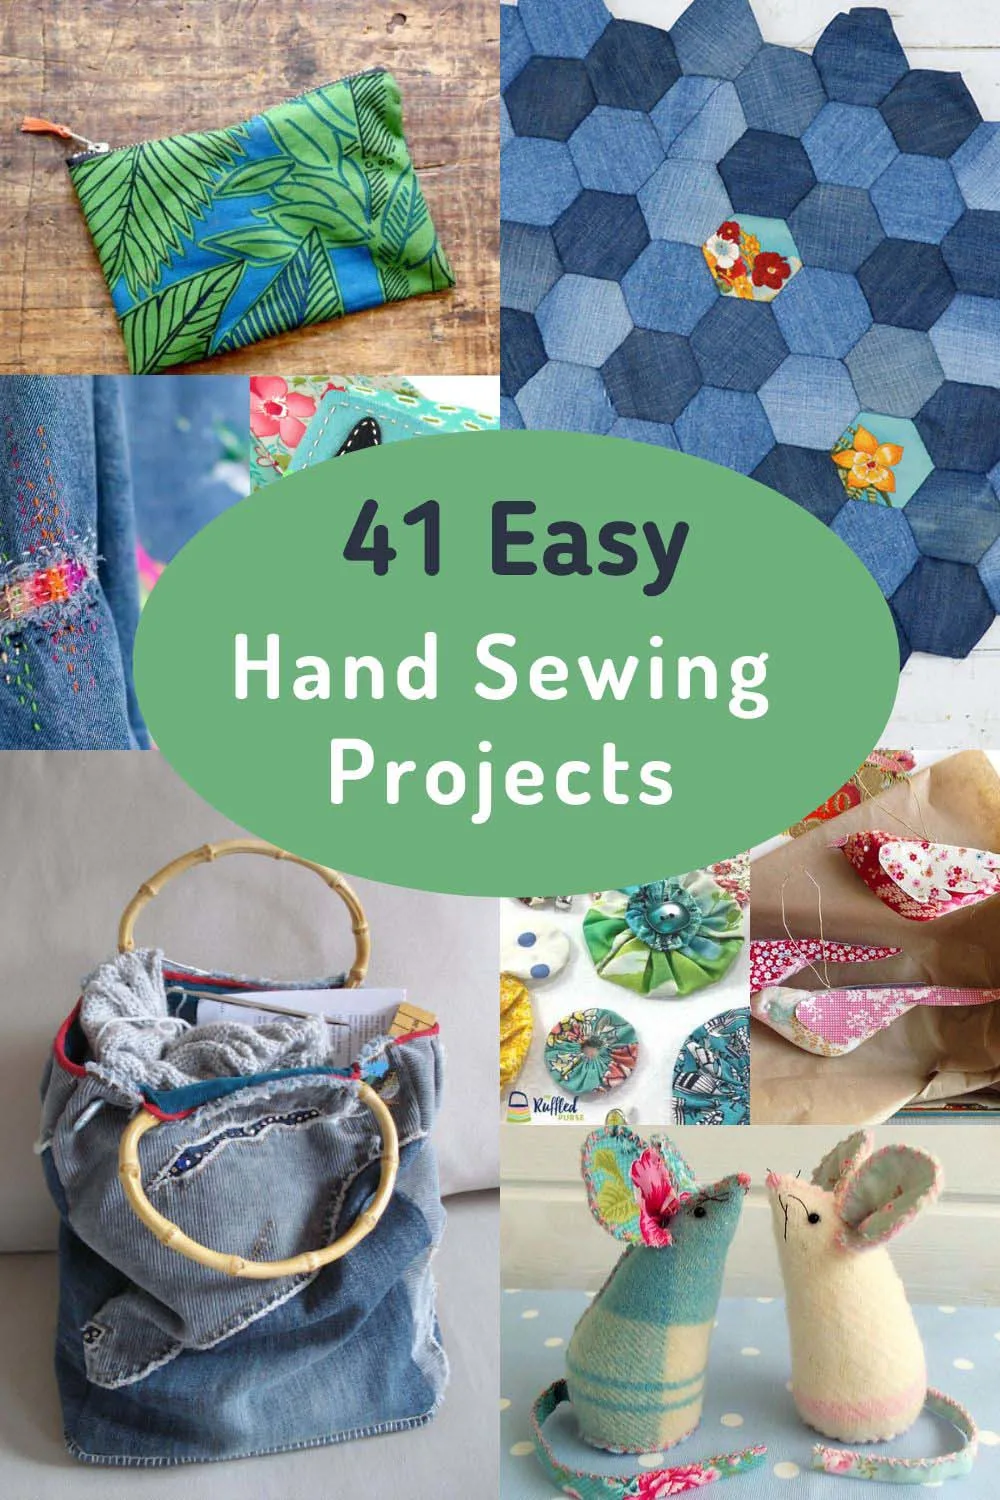 18 Easy Sewing Projects for Beginners - FeltMagnet